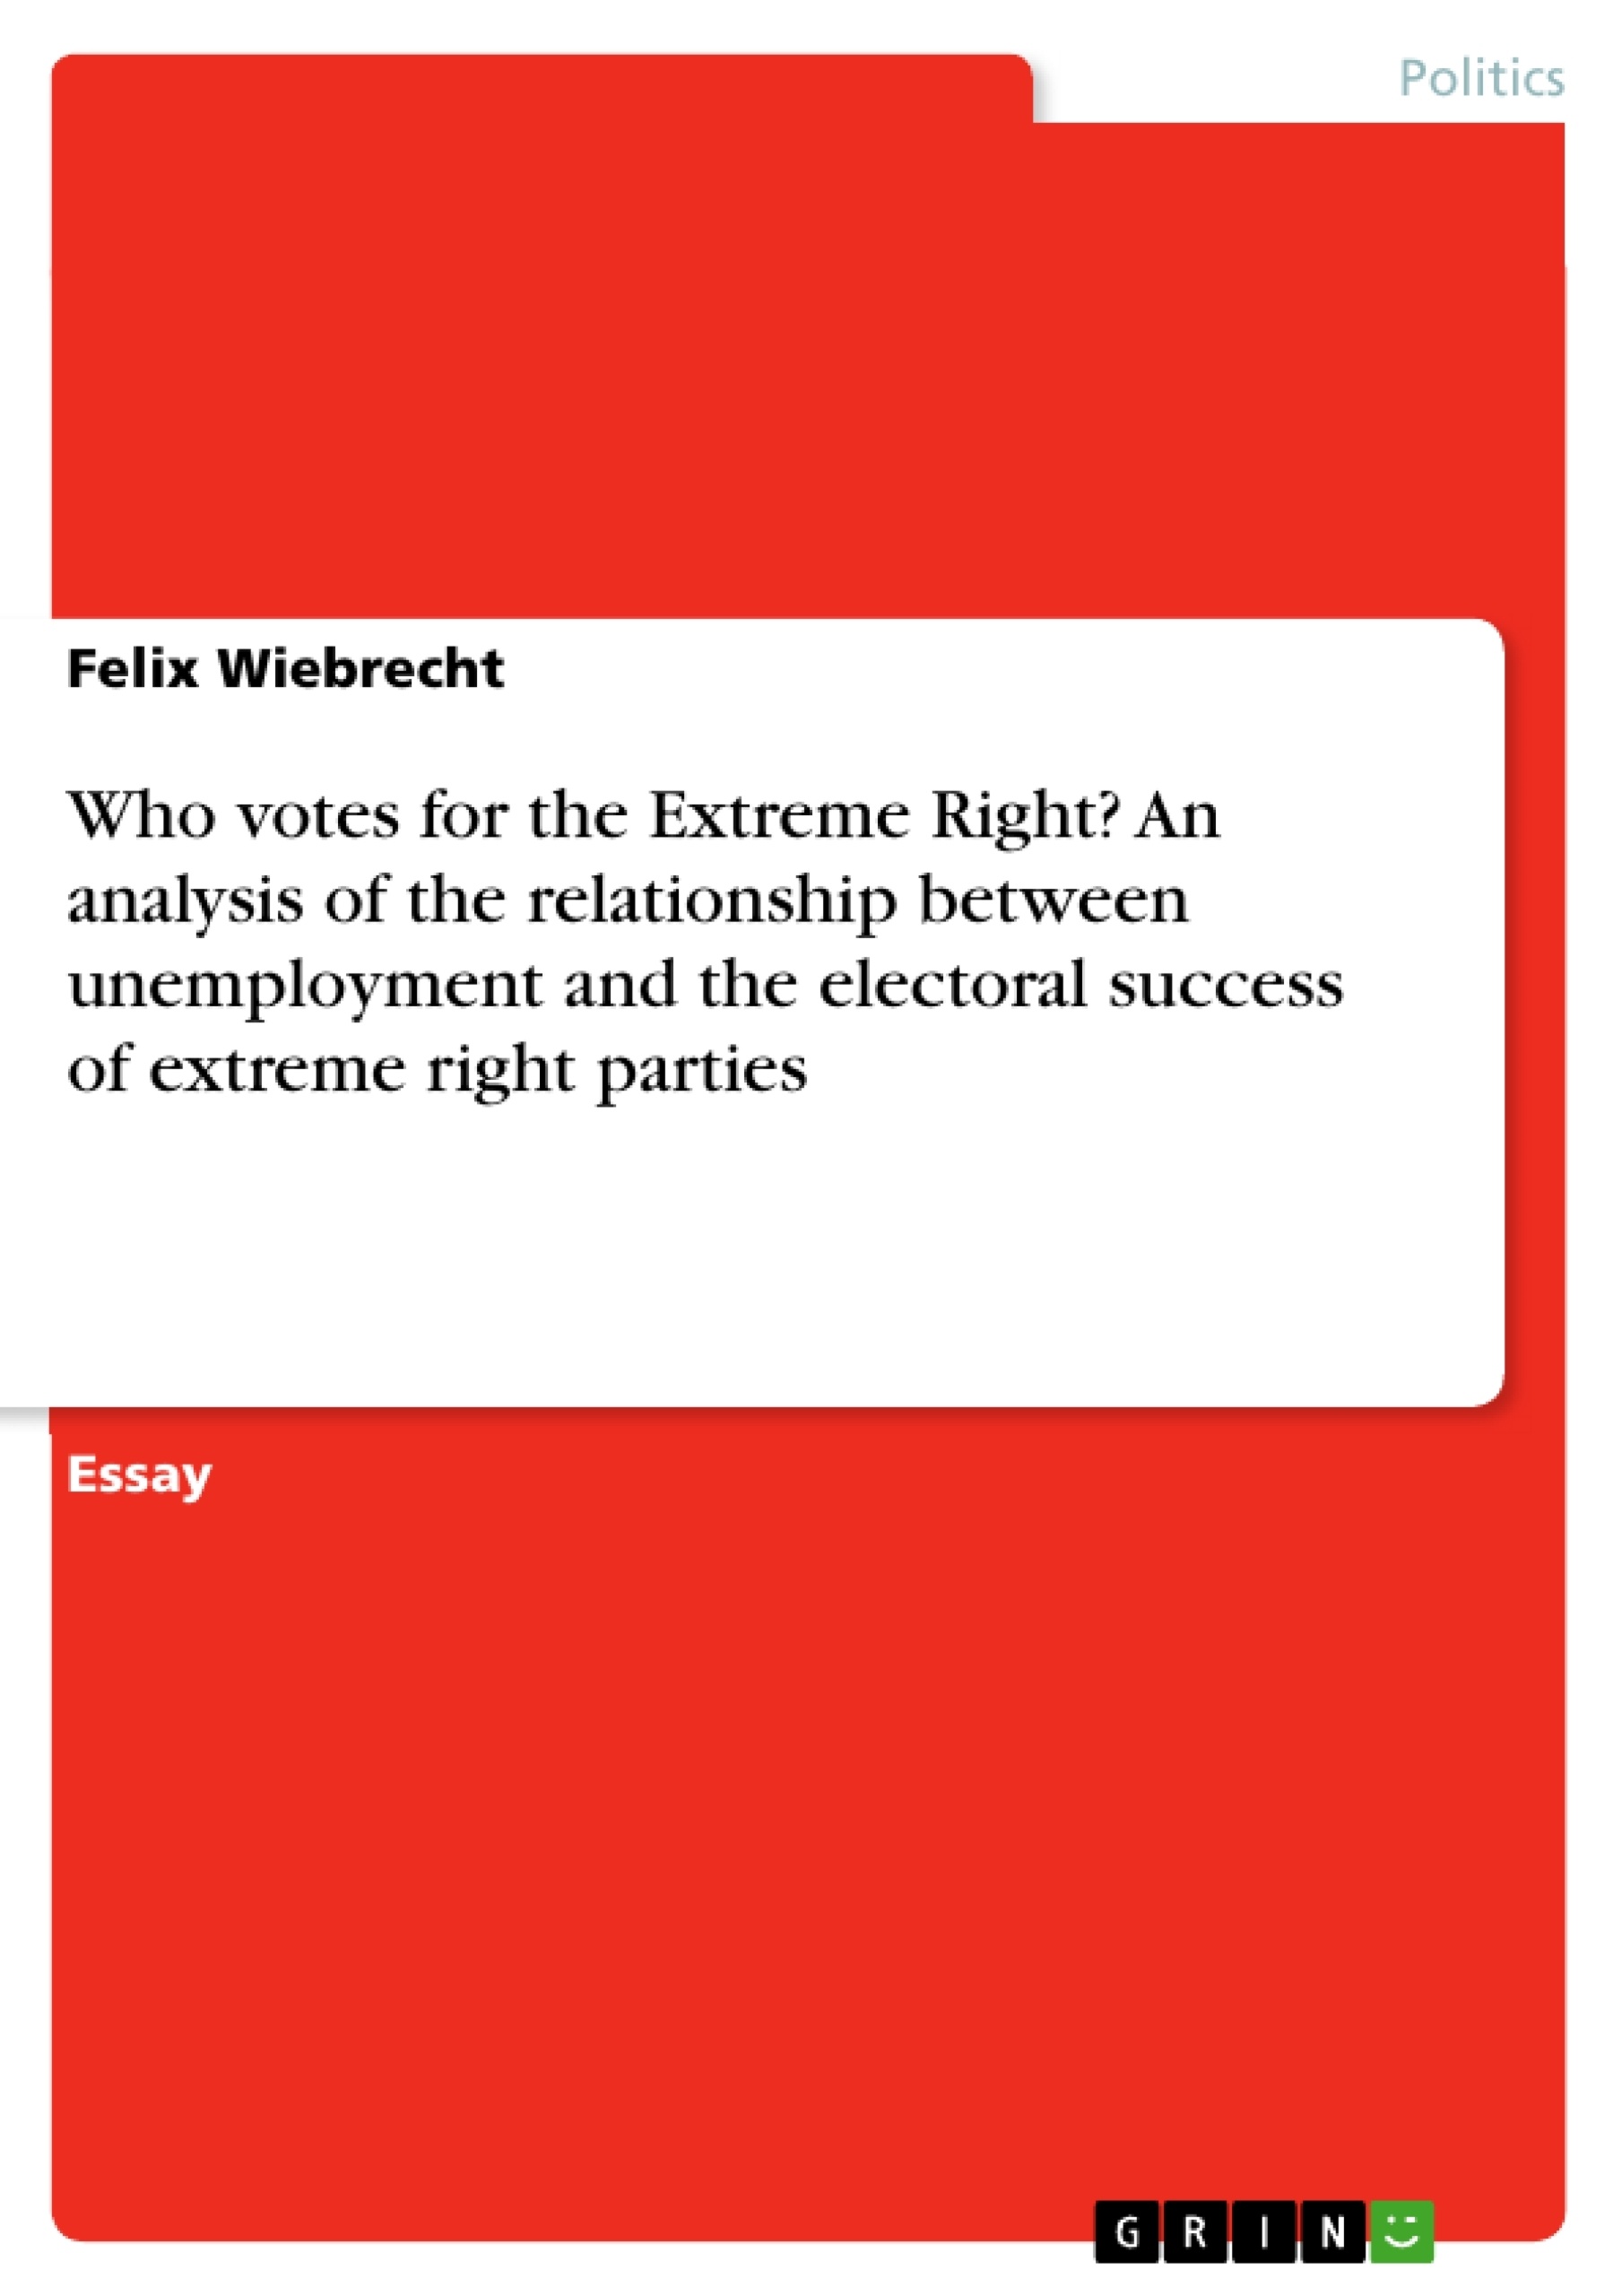 Título: Who votes for the Extreme Right? An analysis of the relationship between unemployment and the electoral success of extreme right parties